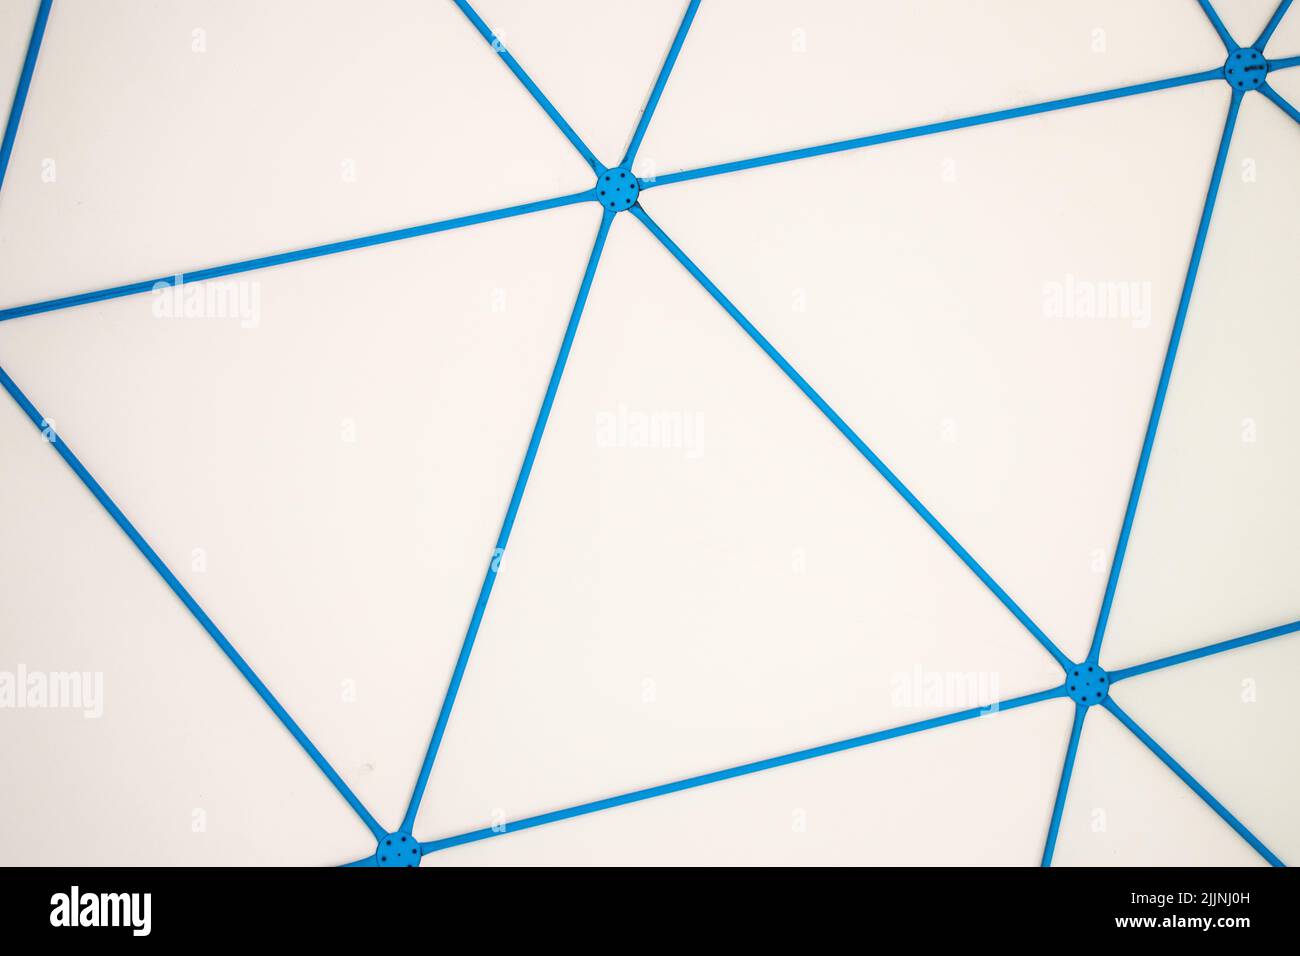 A background of the blue dome's metal structure made with some triangles Stock Photo